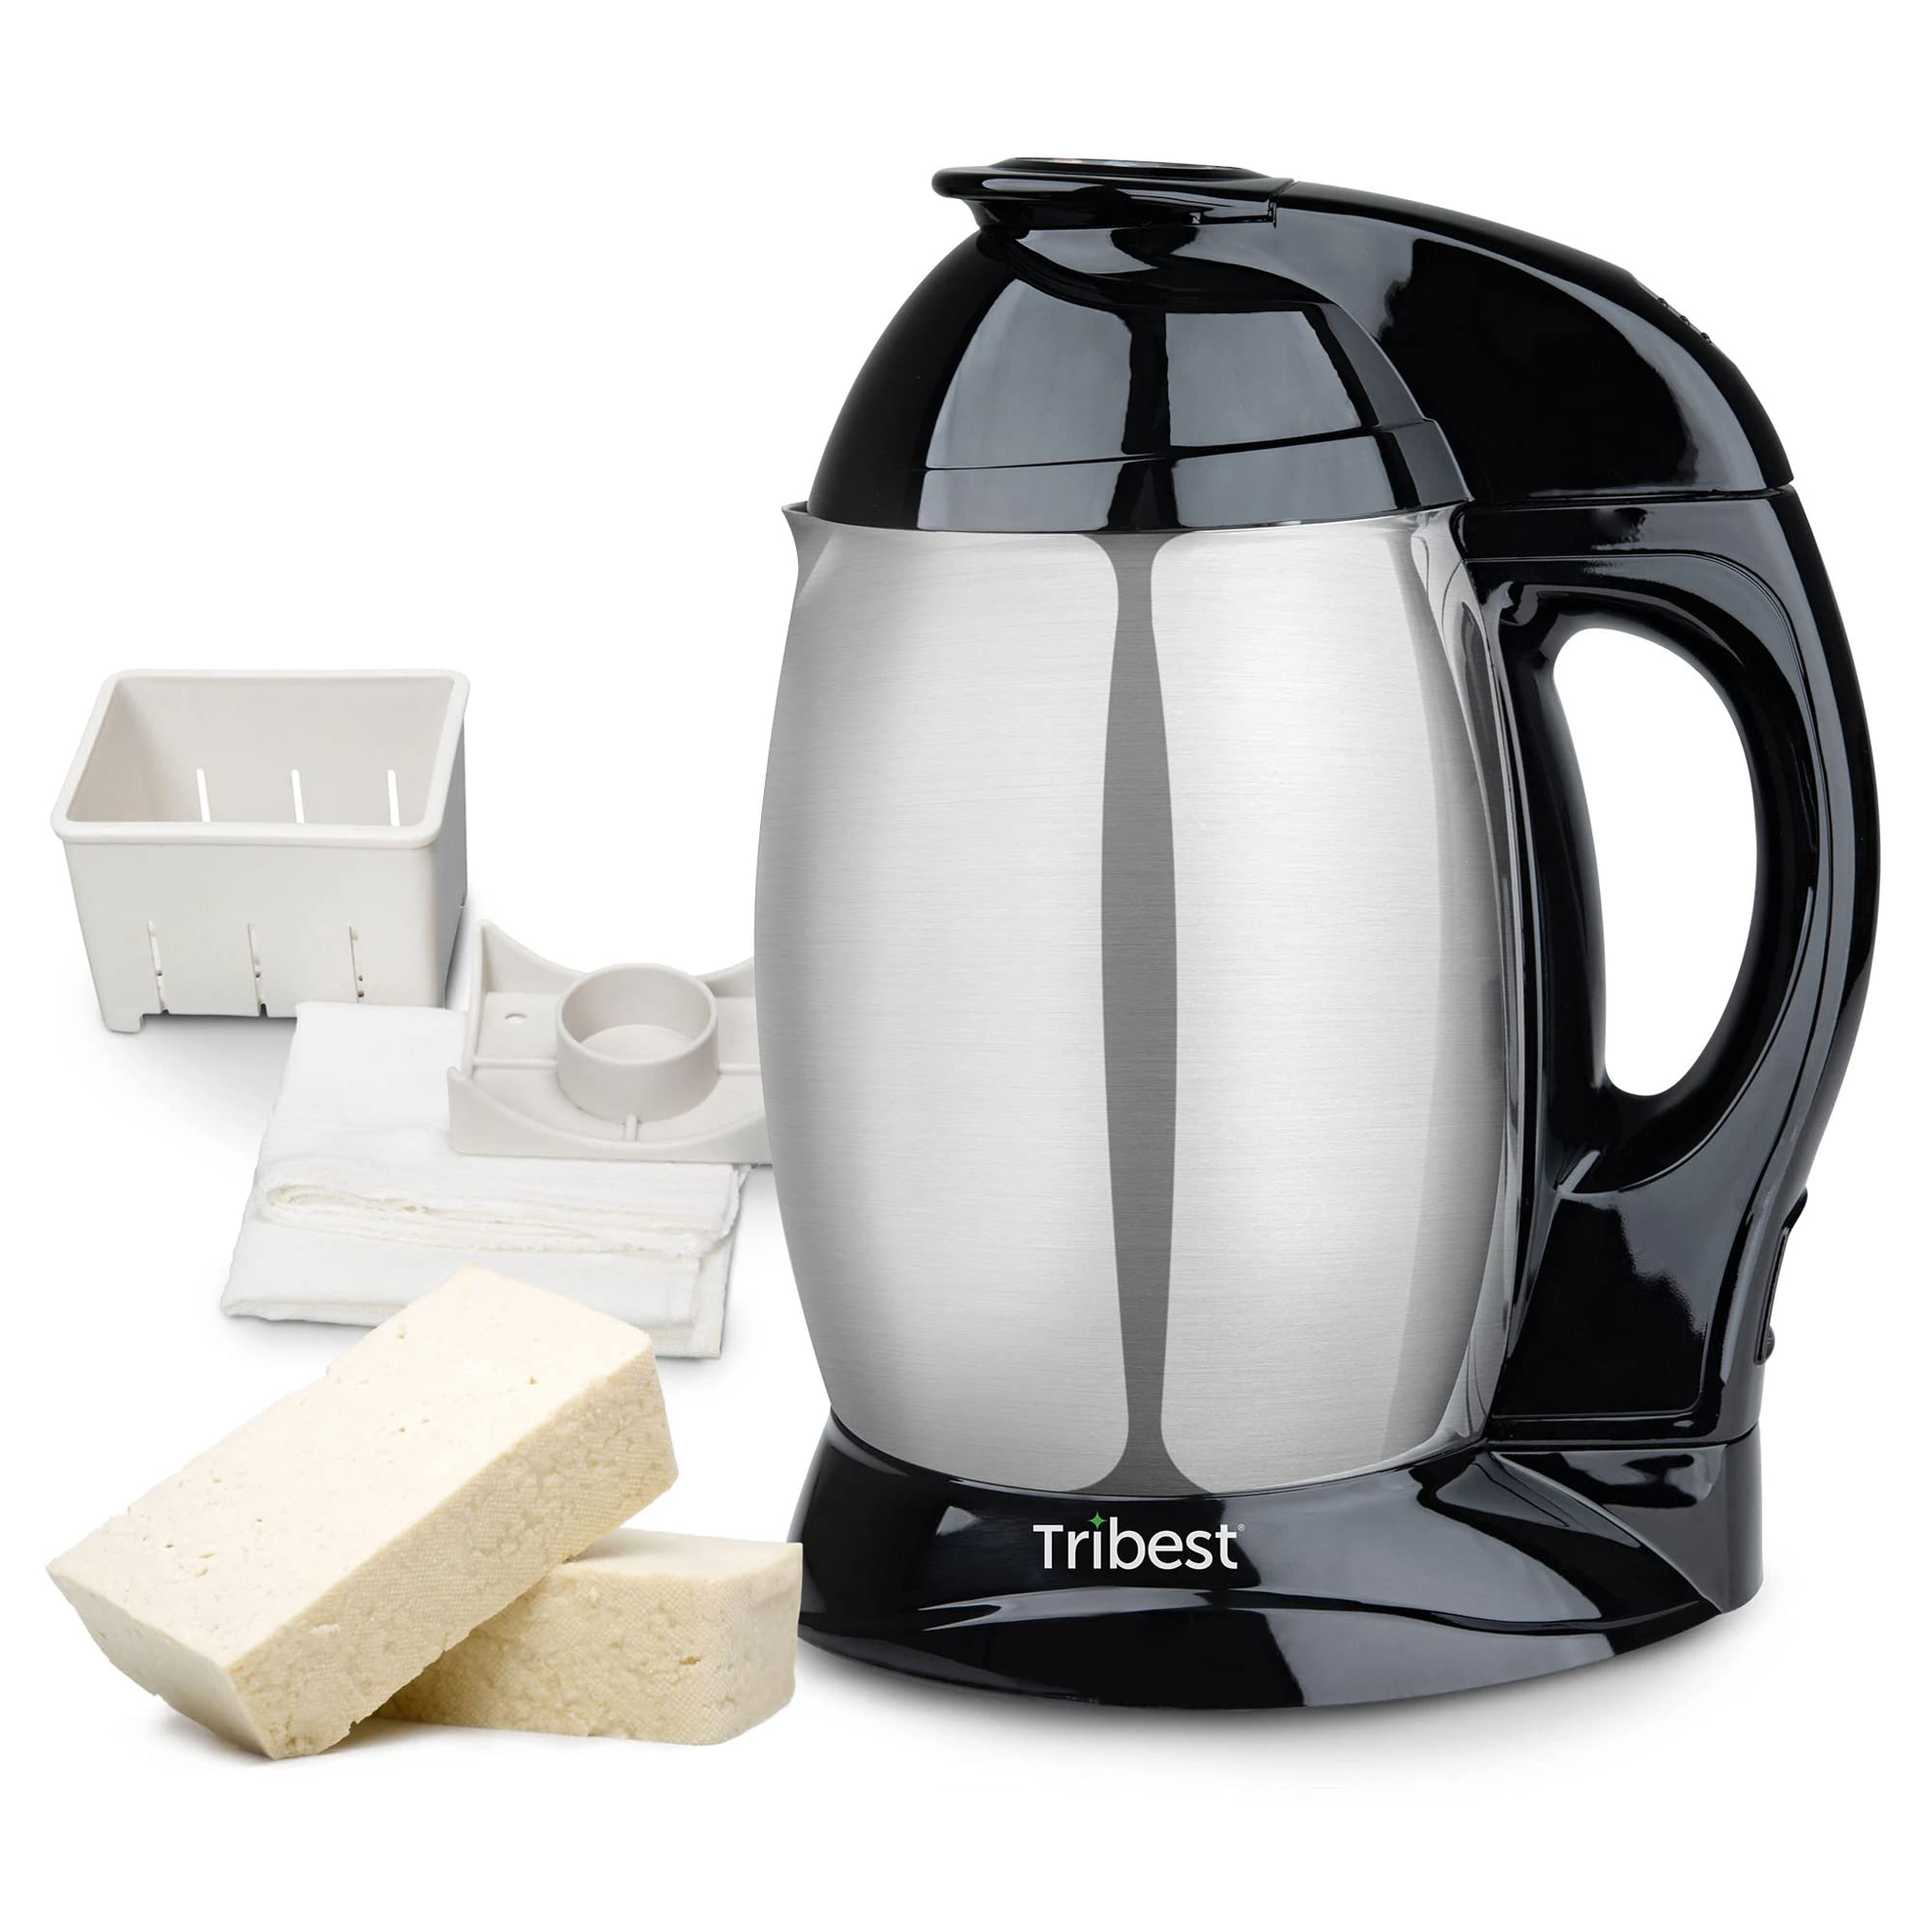 A black electric coffee maker with cheese and other ingredients.